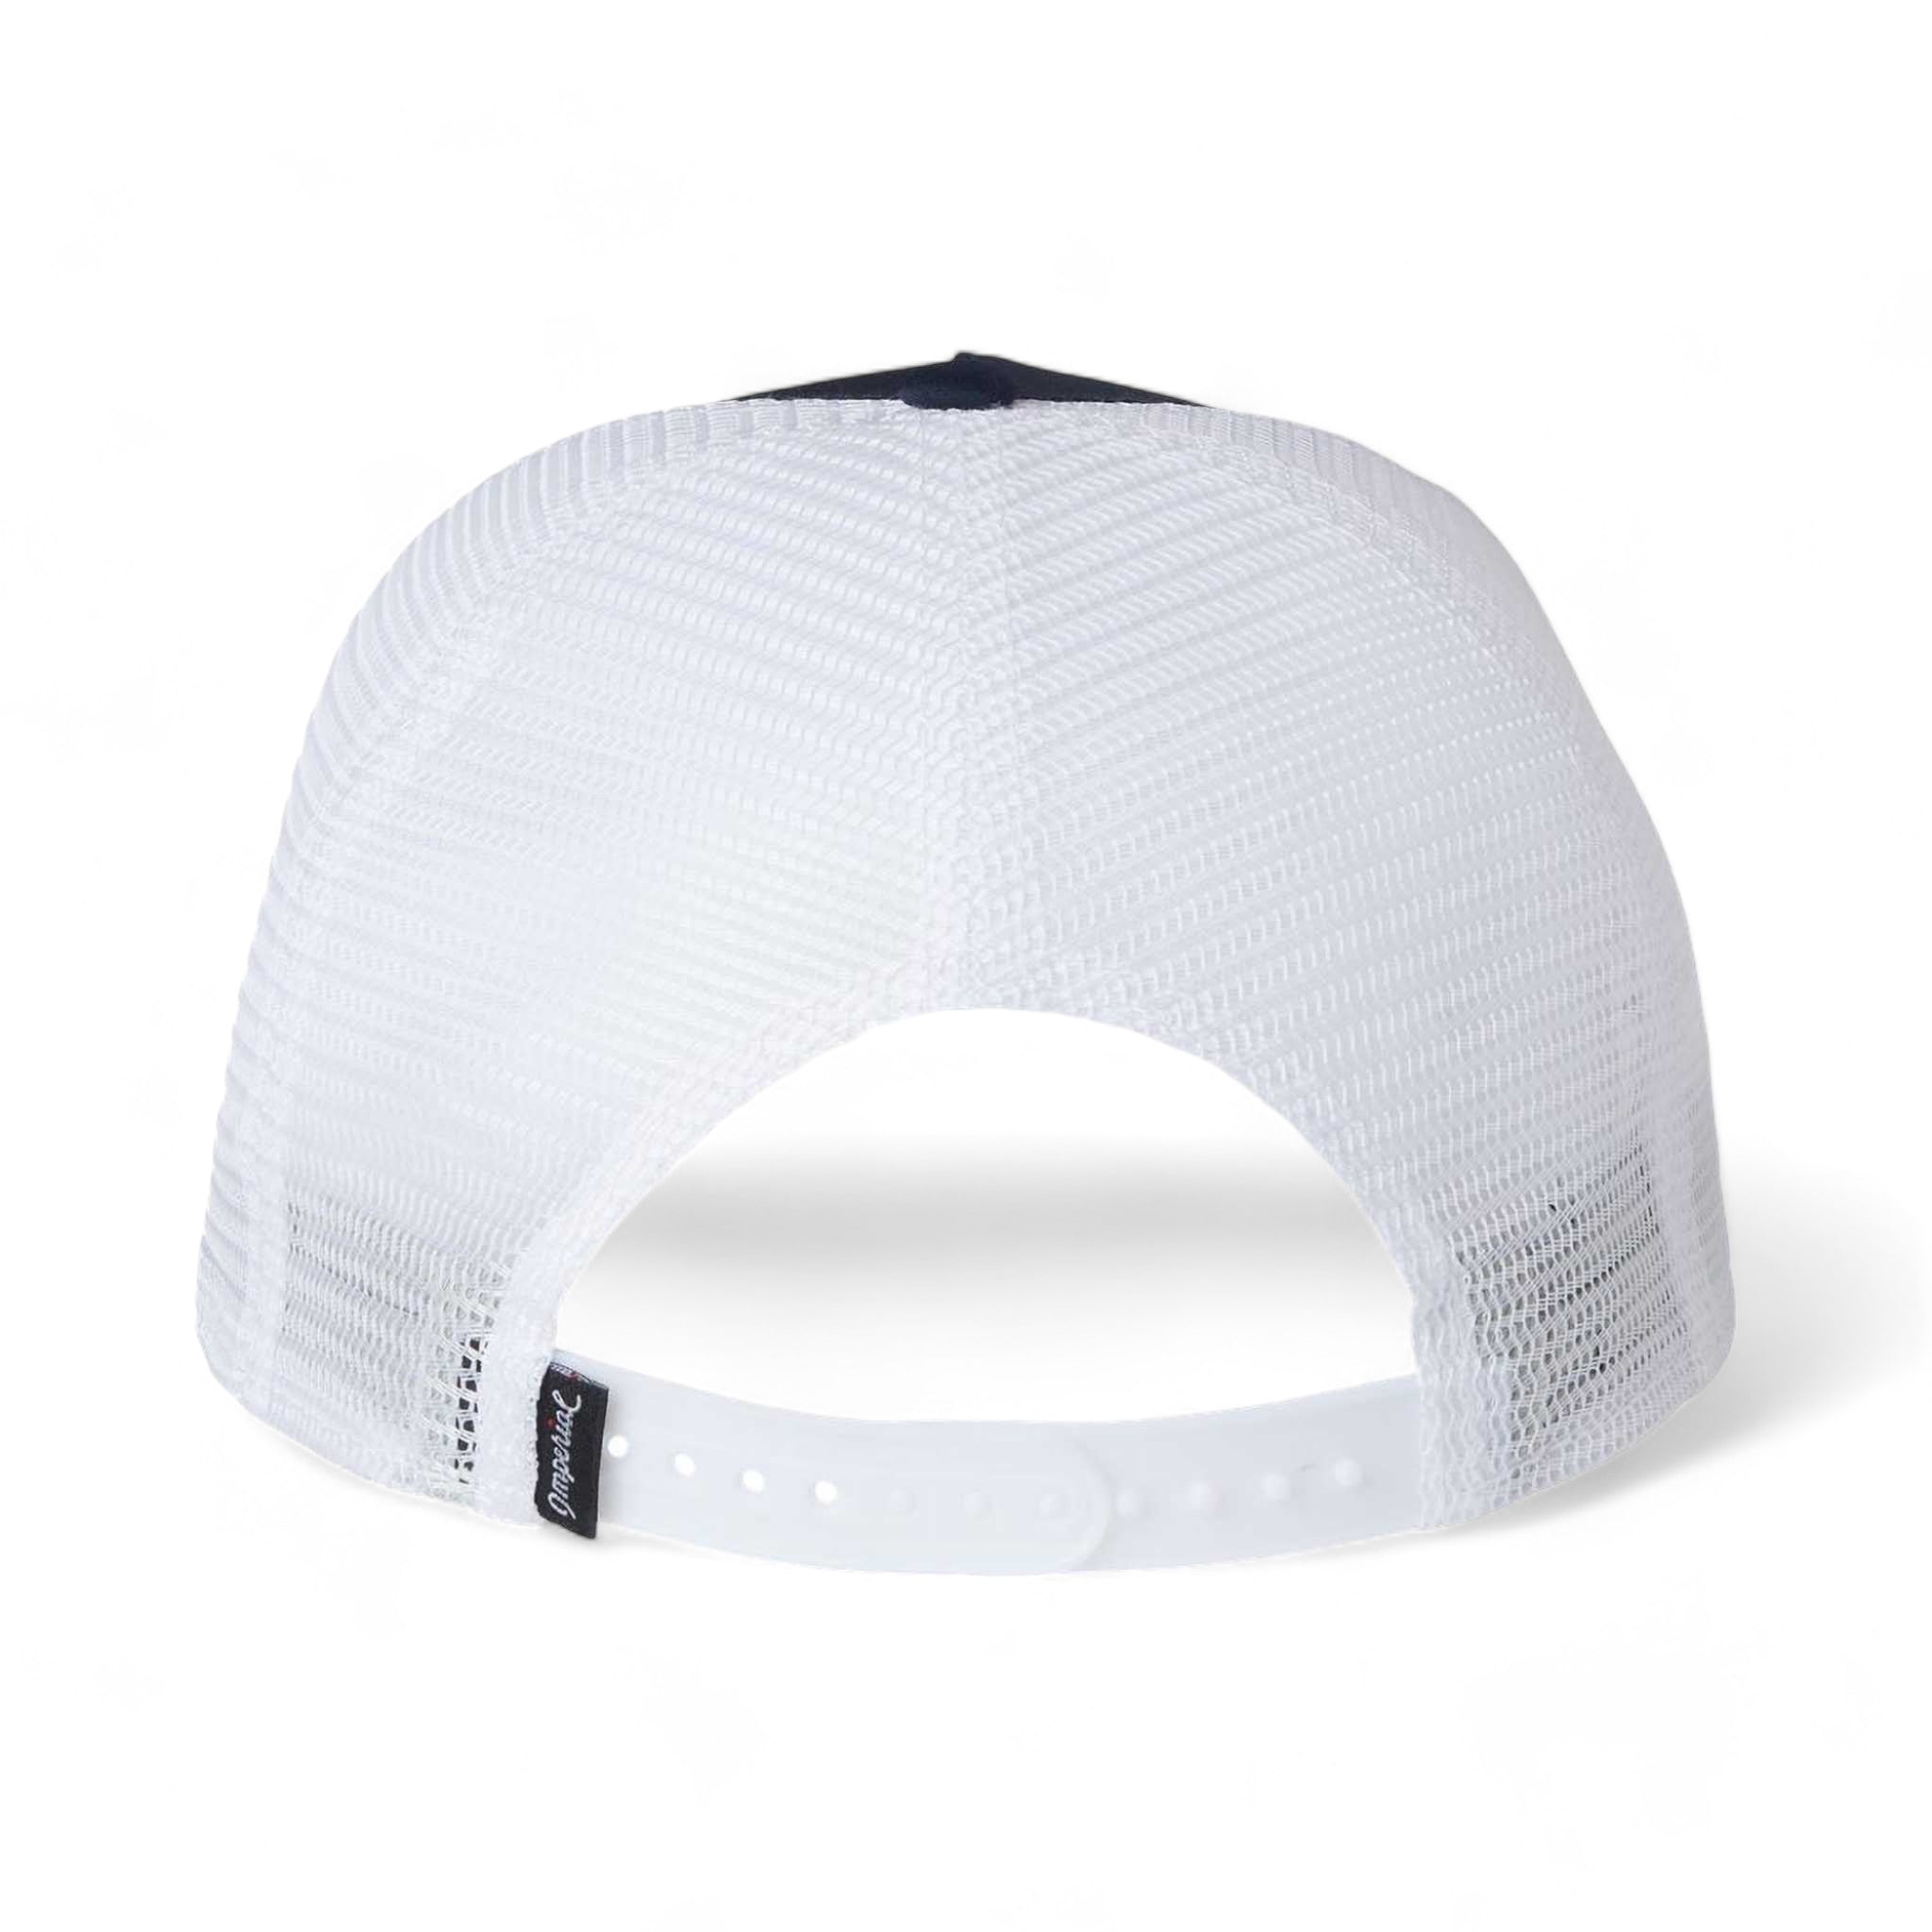 Back view of Imperial 5055 custom hat in navy, white and white